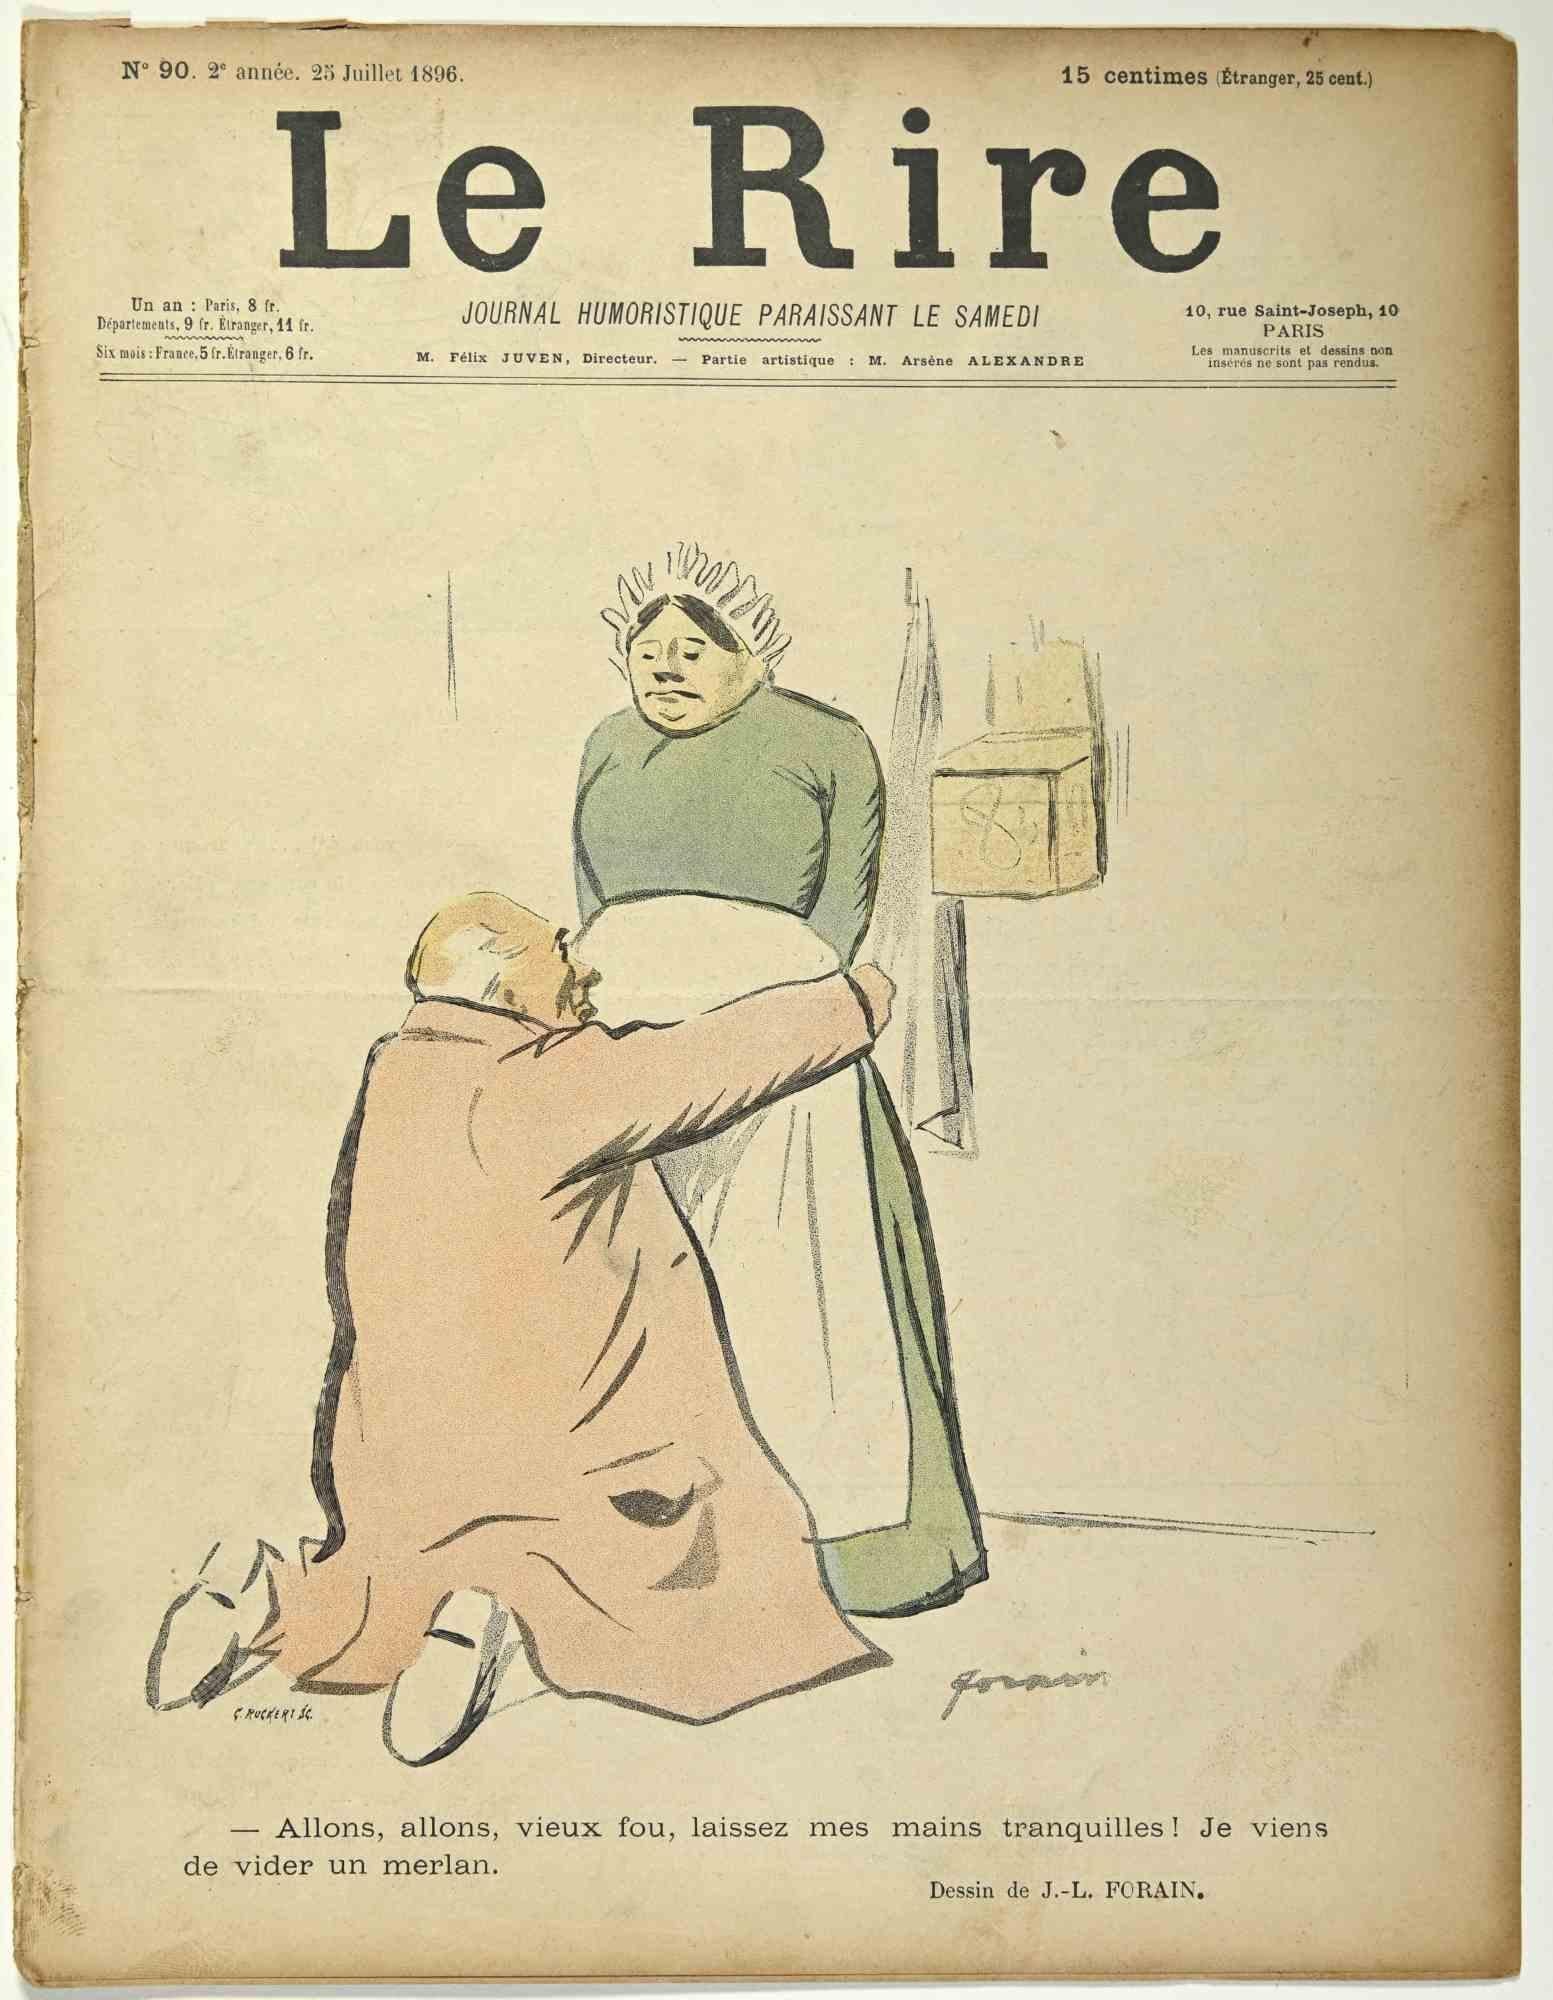 Le Rire is a Comic Magazine published in july 1896, reproducing drawings by  Jean Luis Forain (1852-1931).

Good condition on a yellowed paper, except some torn paper on the left margin.

Stamp signed on the lower right corner.

Jean Luis